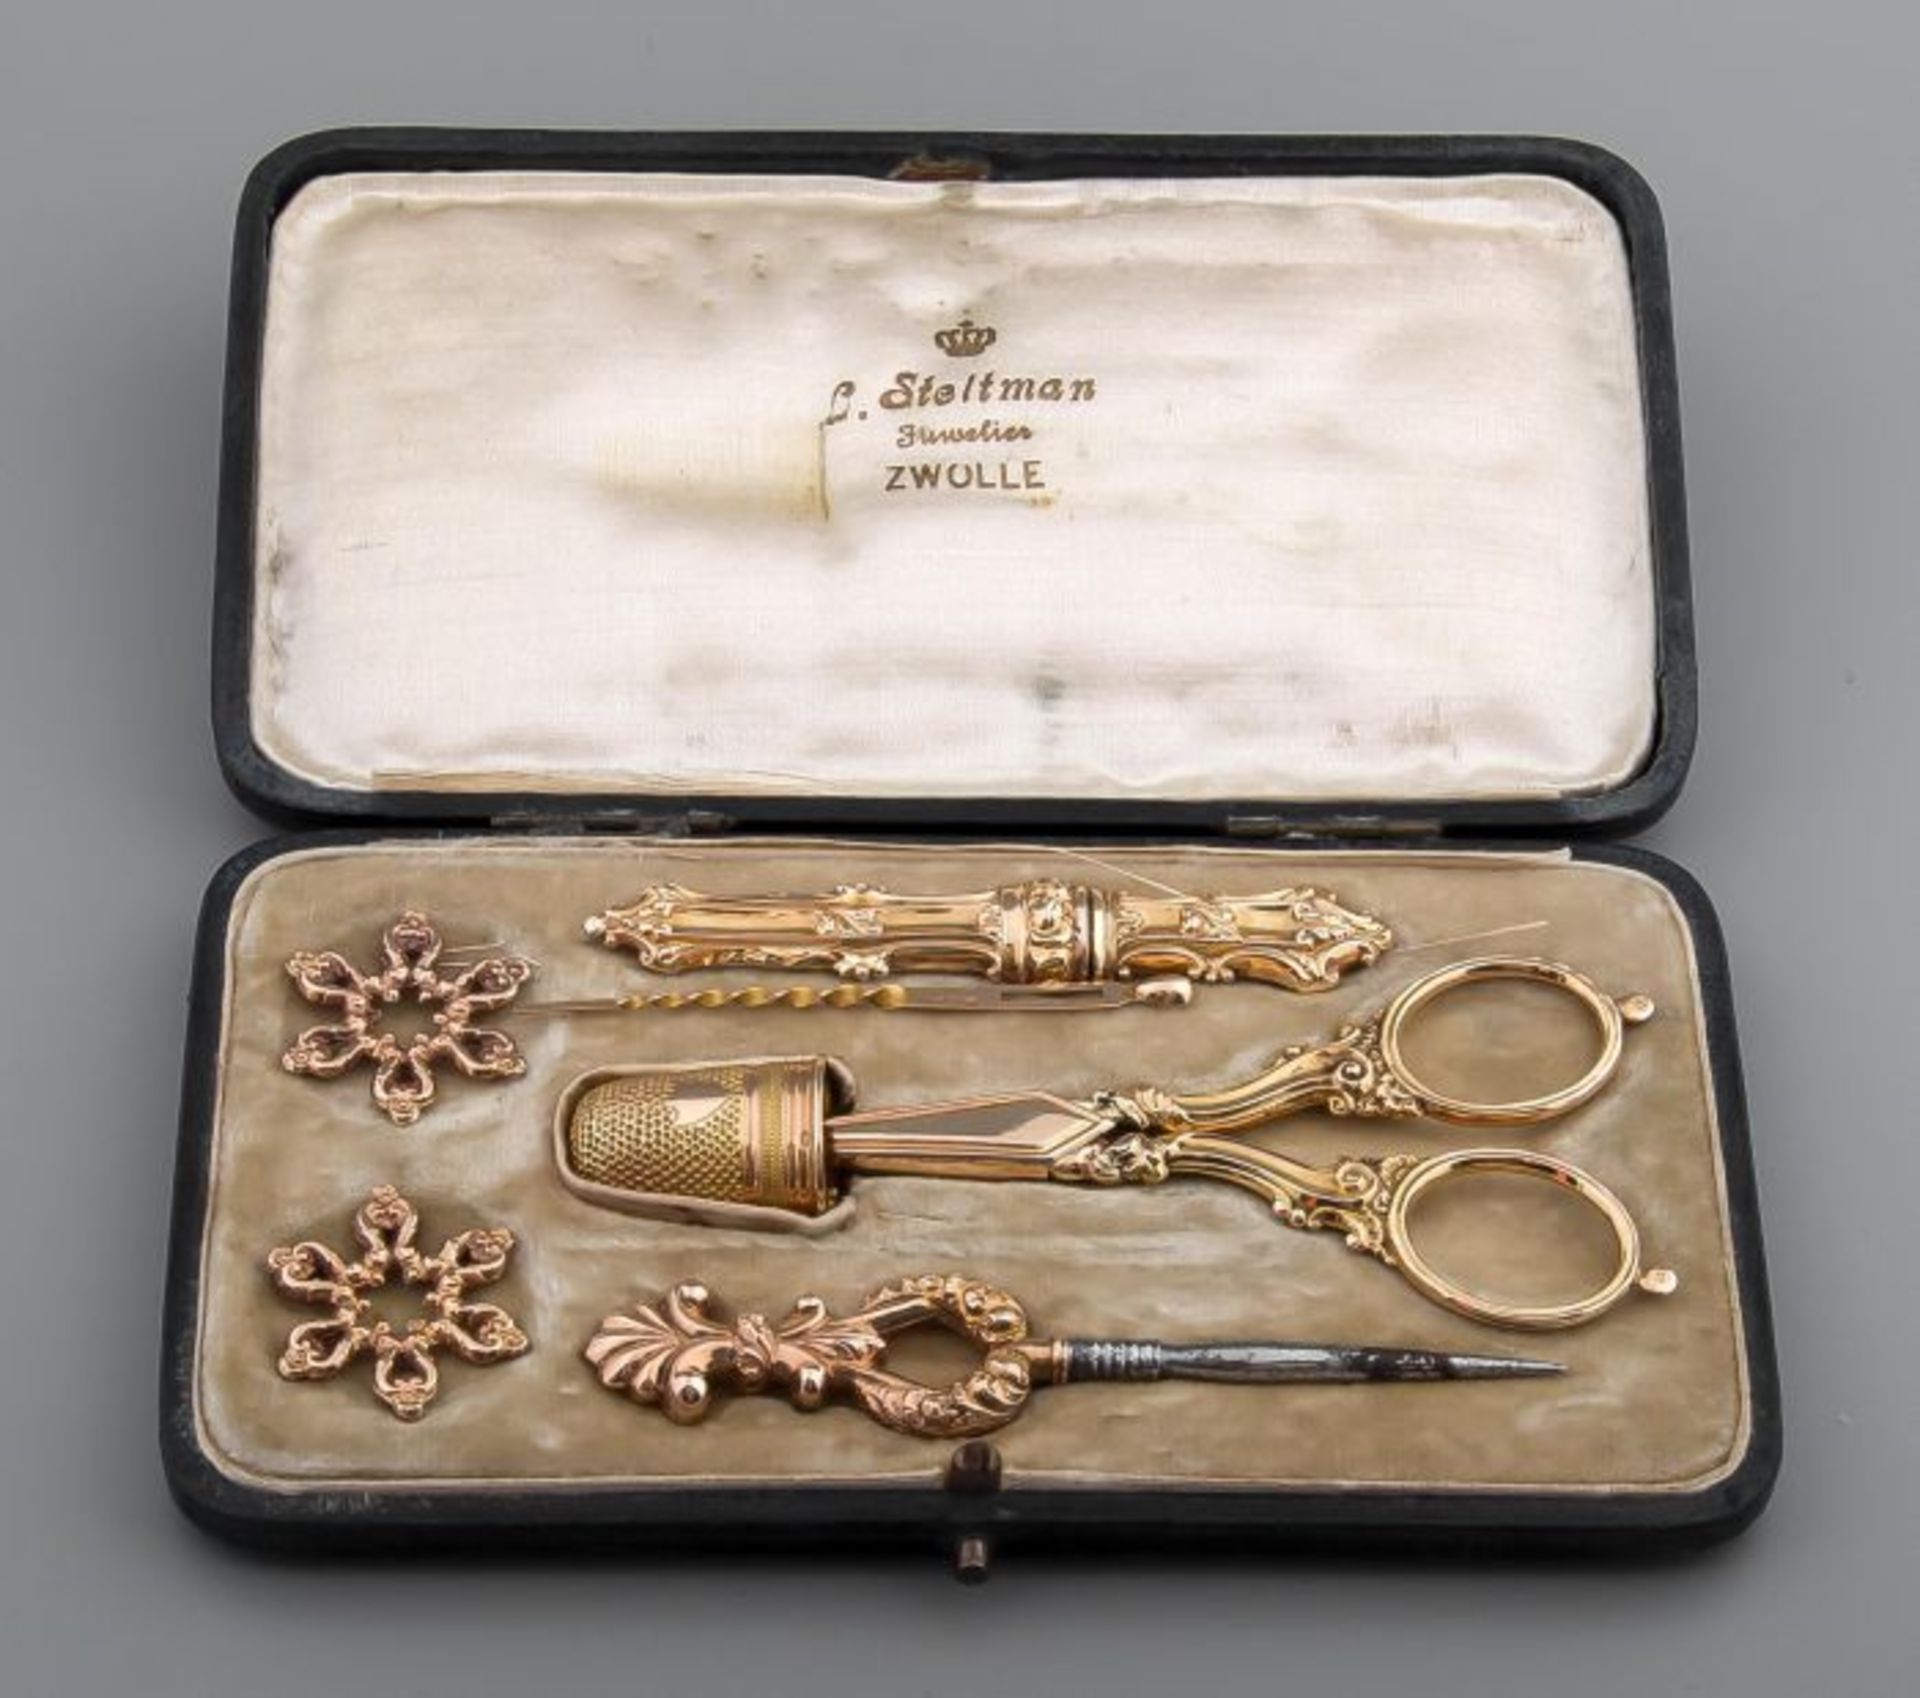 Eight-piece gold (535/000) sewing kit in case comprising: needle case, scissors with sheath, thimble